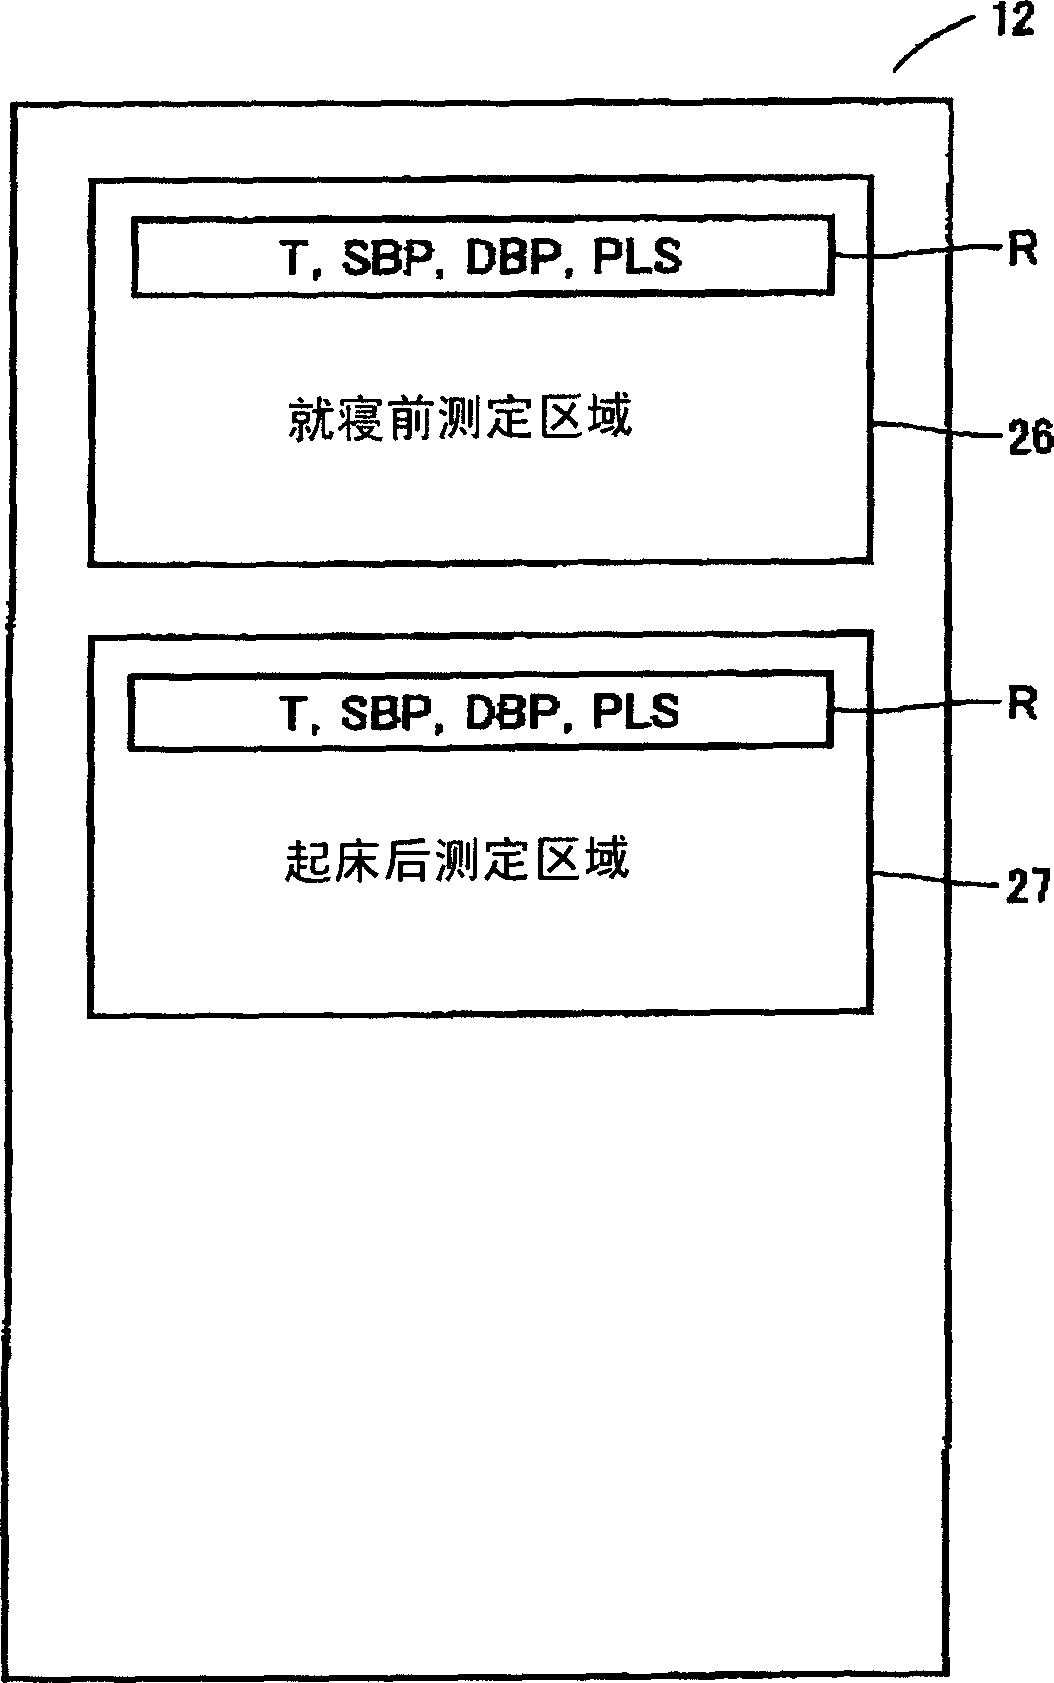 Electronic blood pressure monitor, and blood pressure measurement data processing apparatus and method